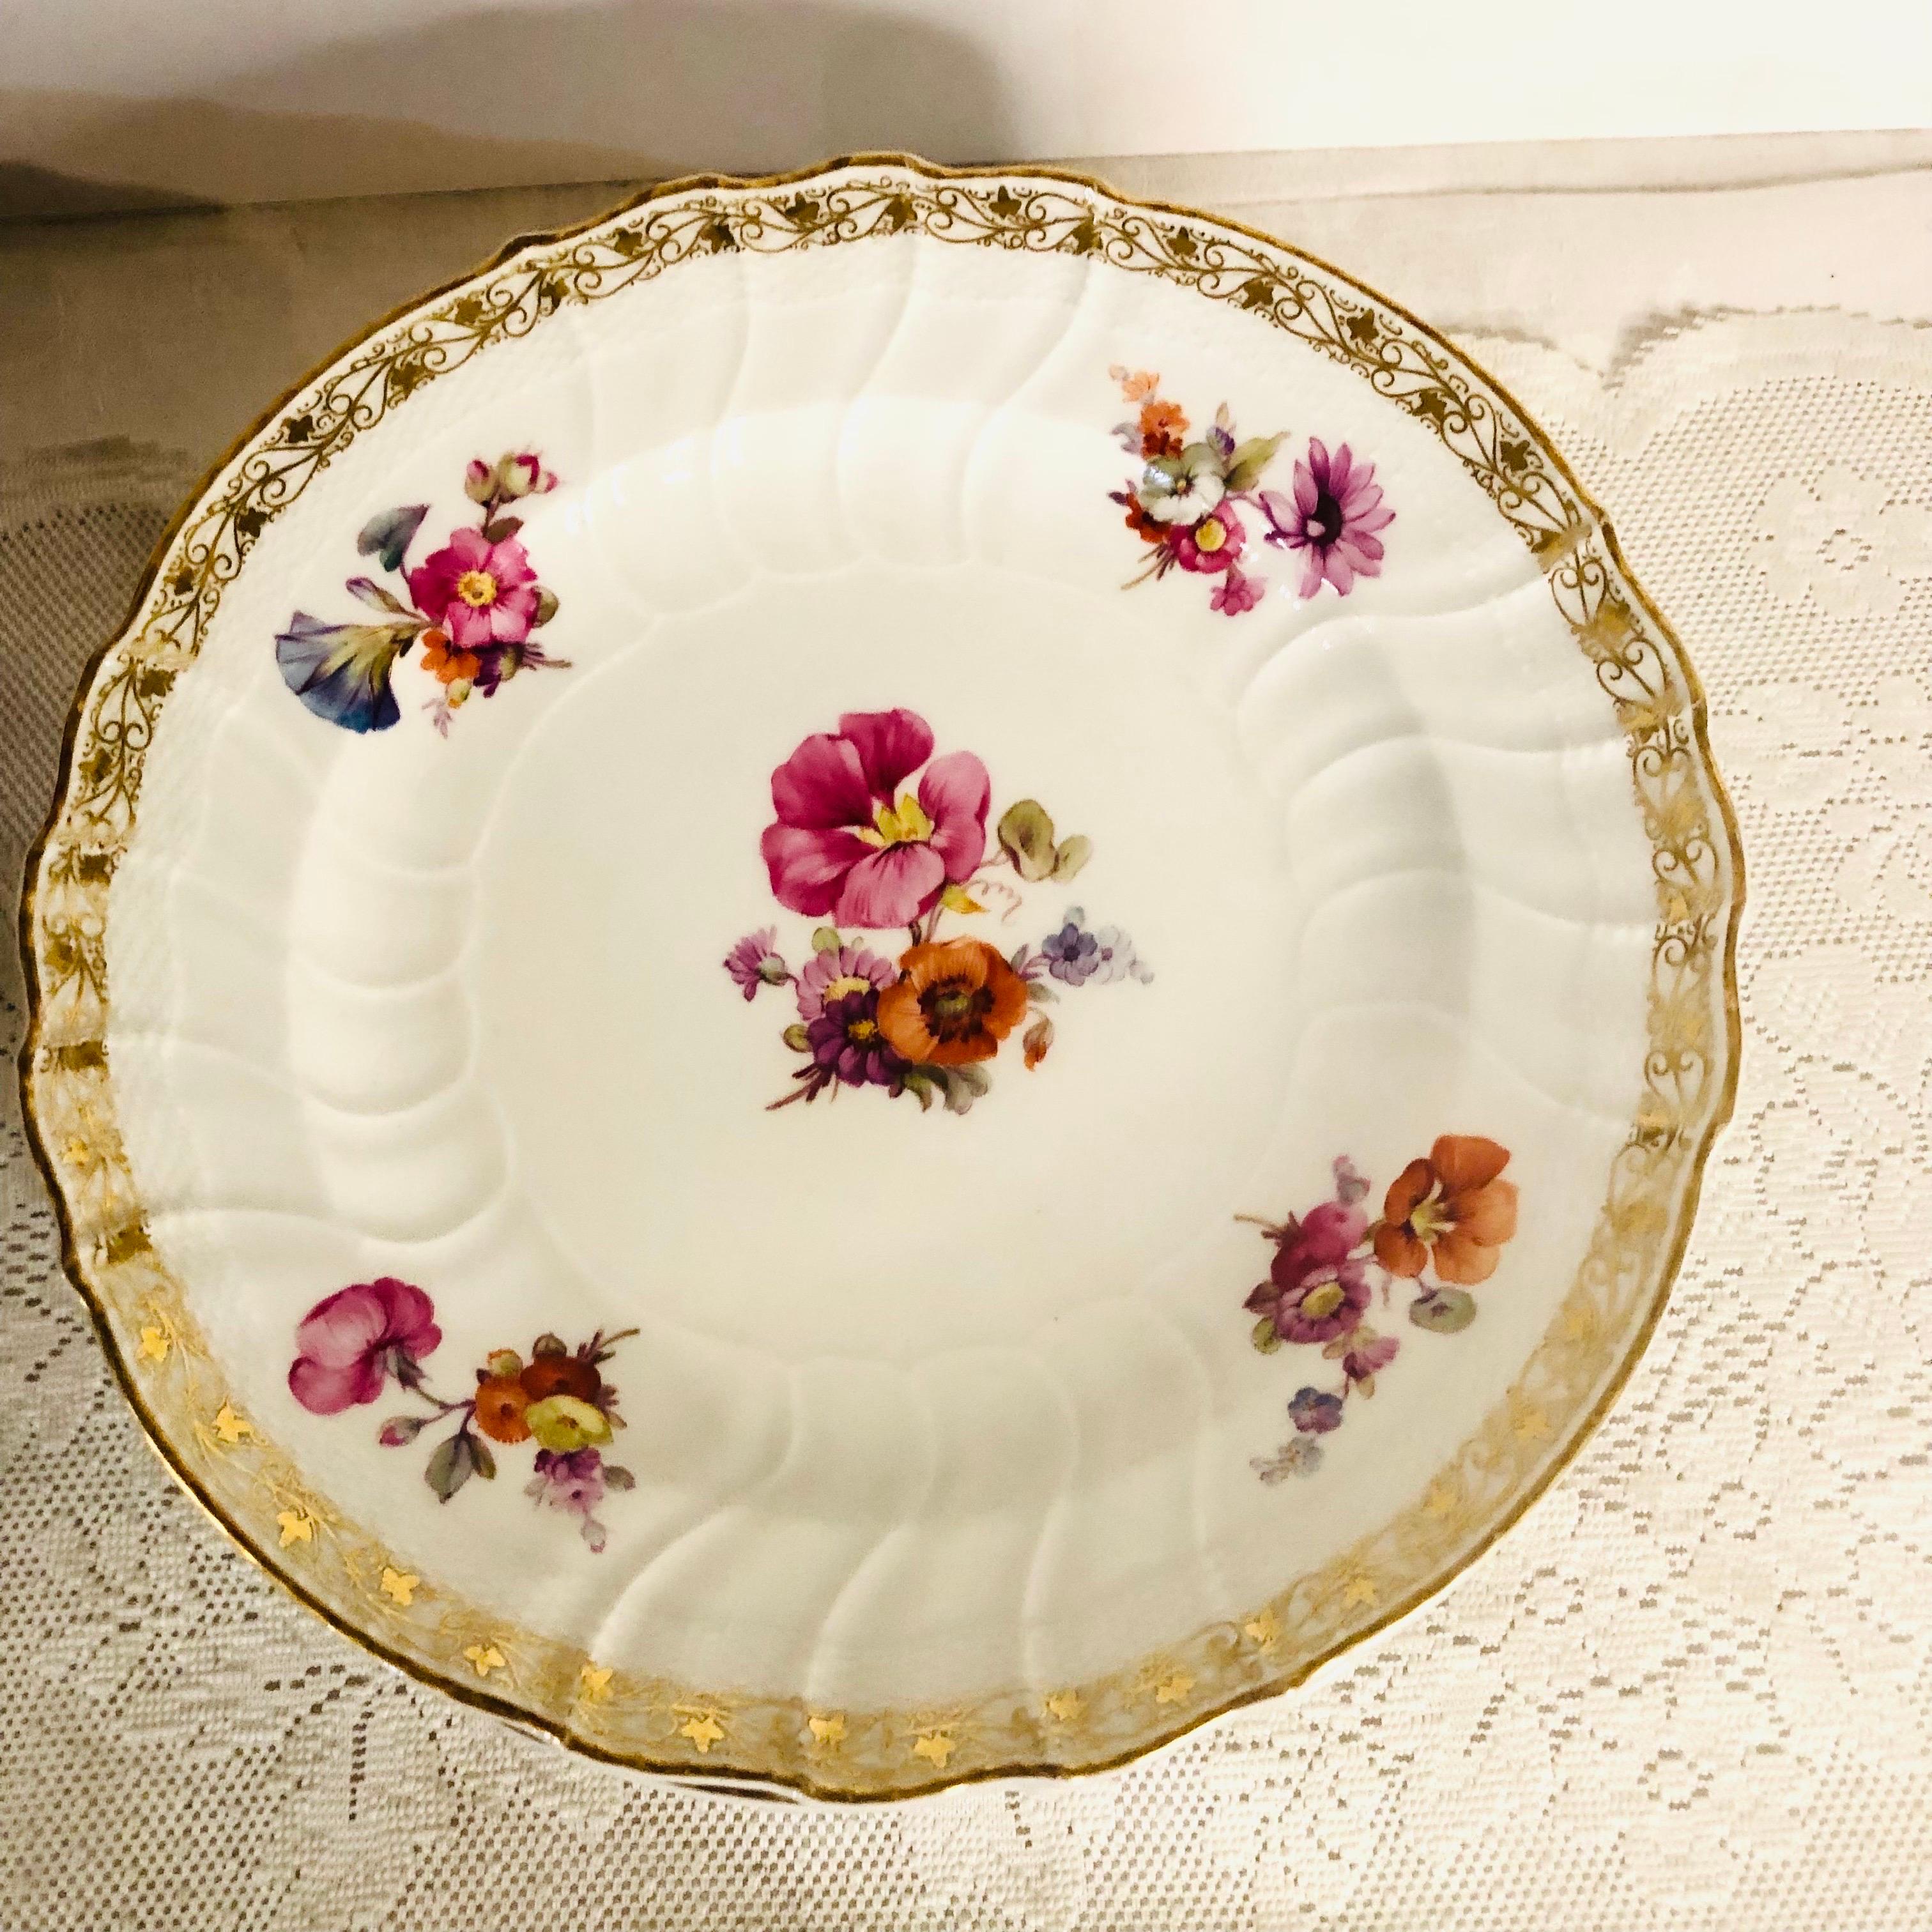 12 KPM Dinner Plates, Each Hand-Painted with a Different Central Flower Bouquet For Sale 3